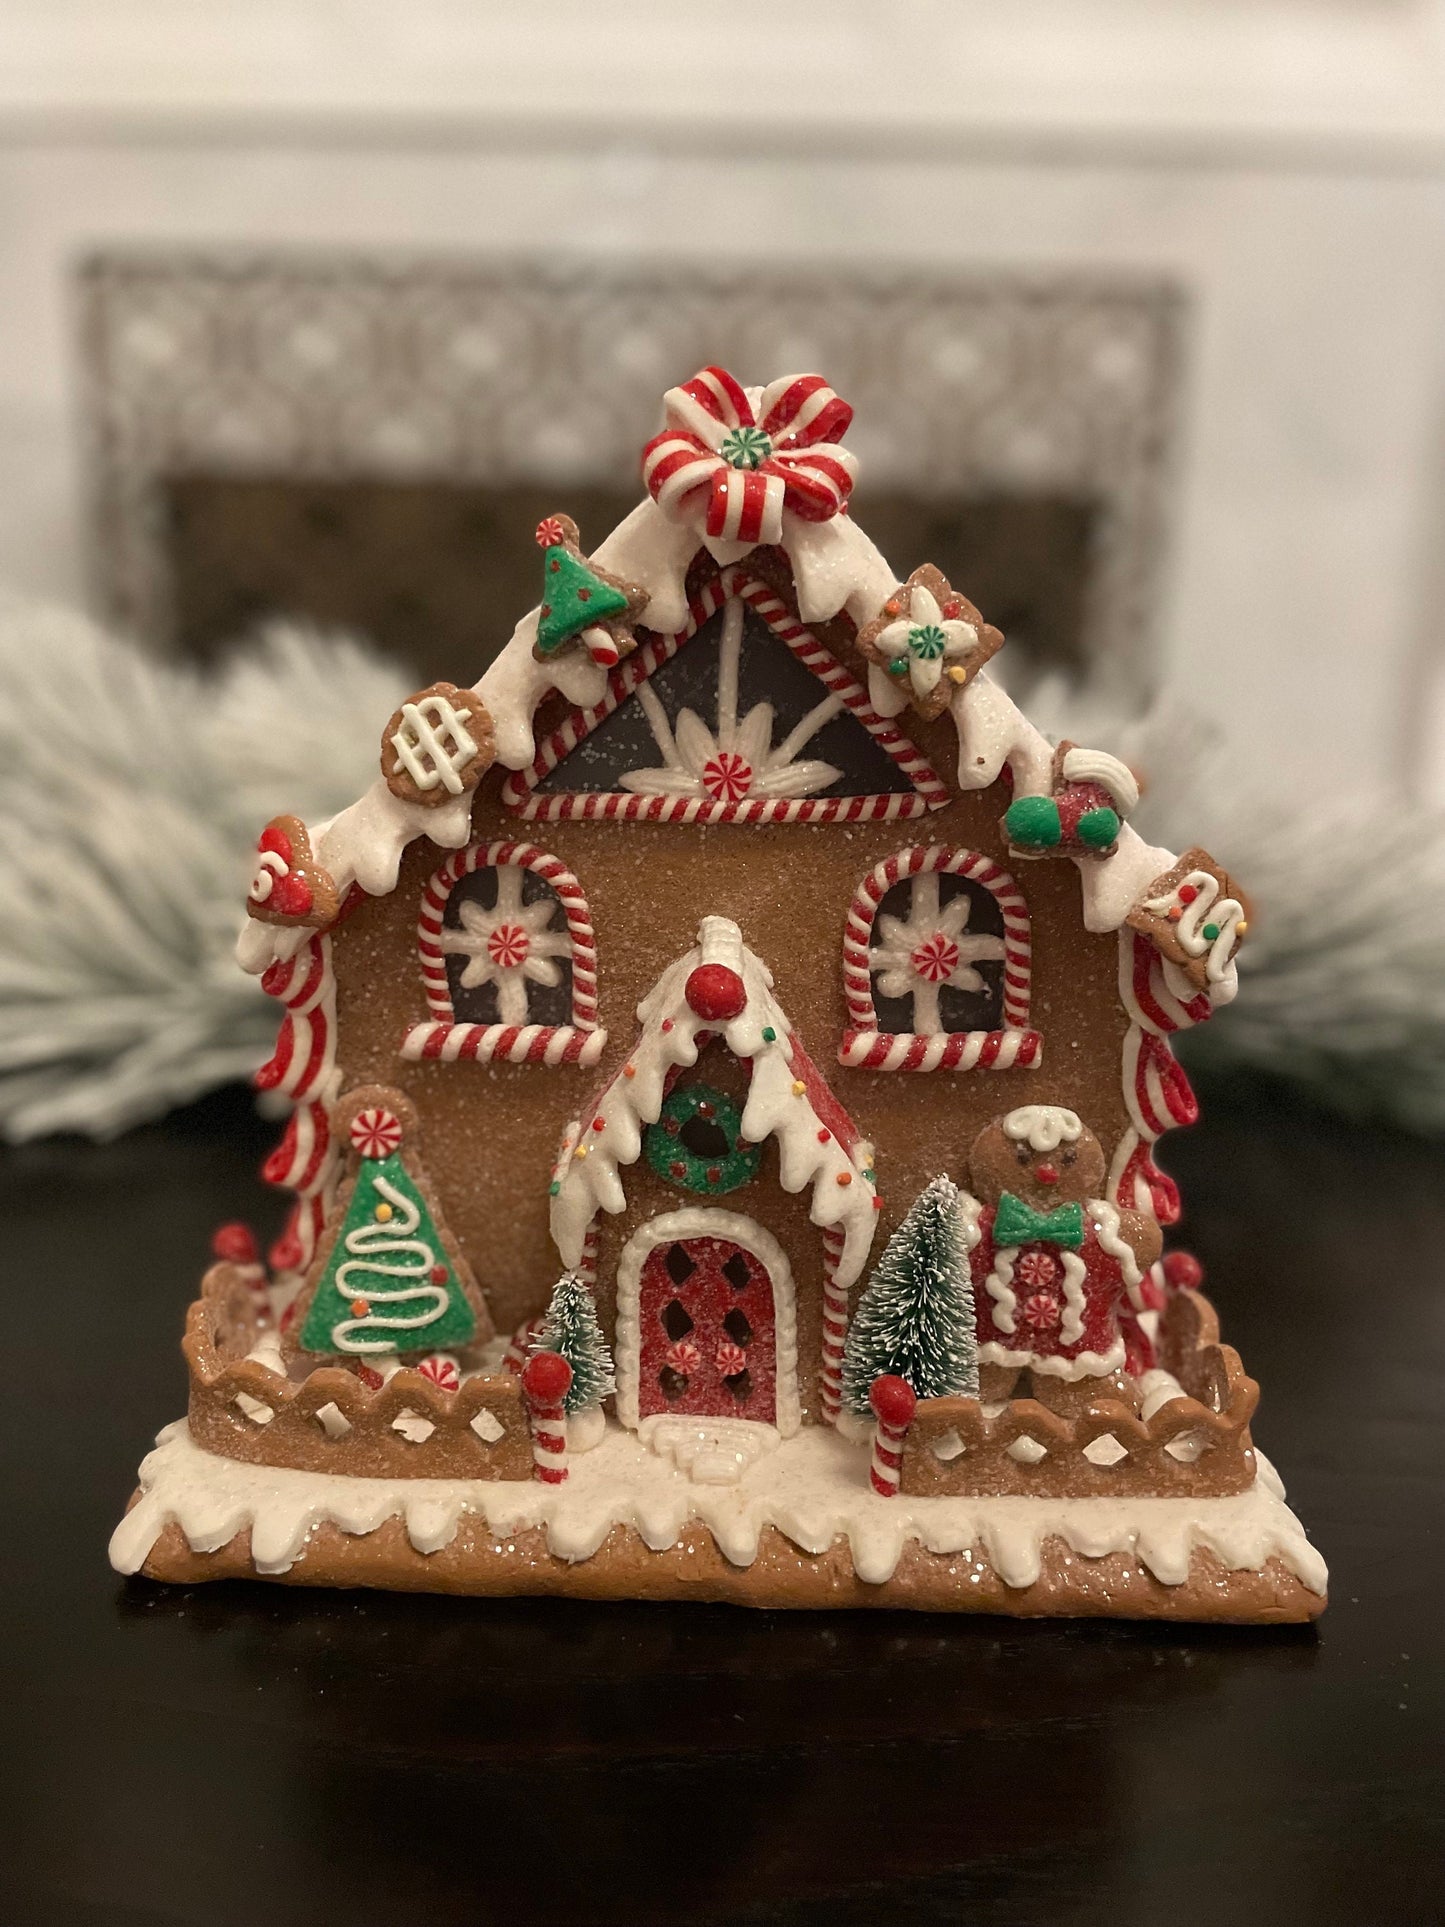 9”H Gingerbread lighted house.